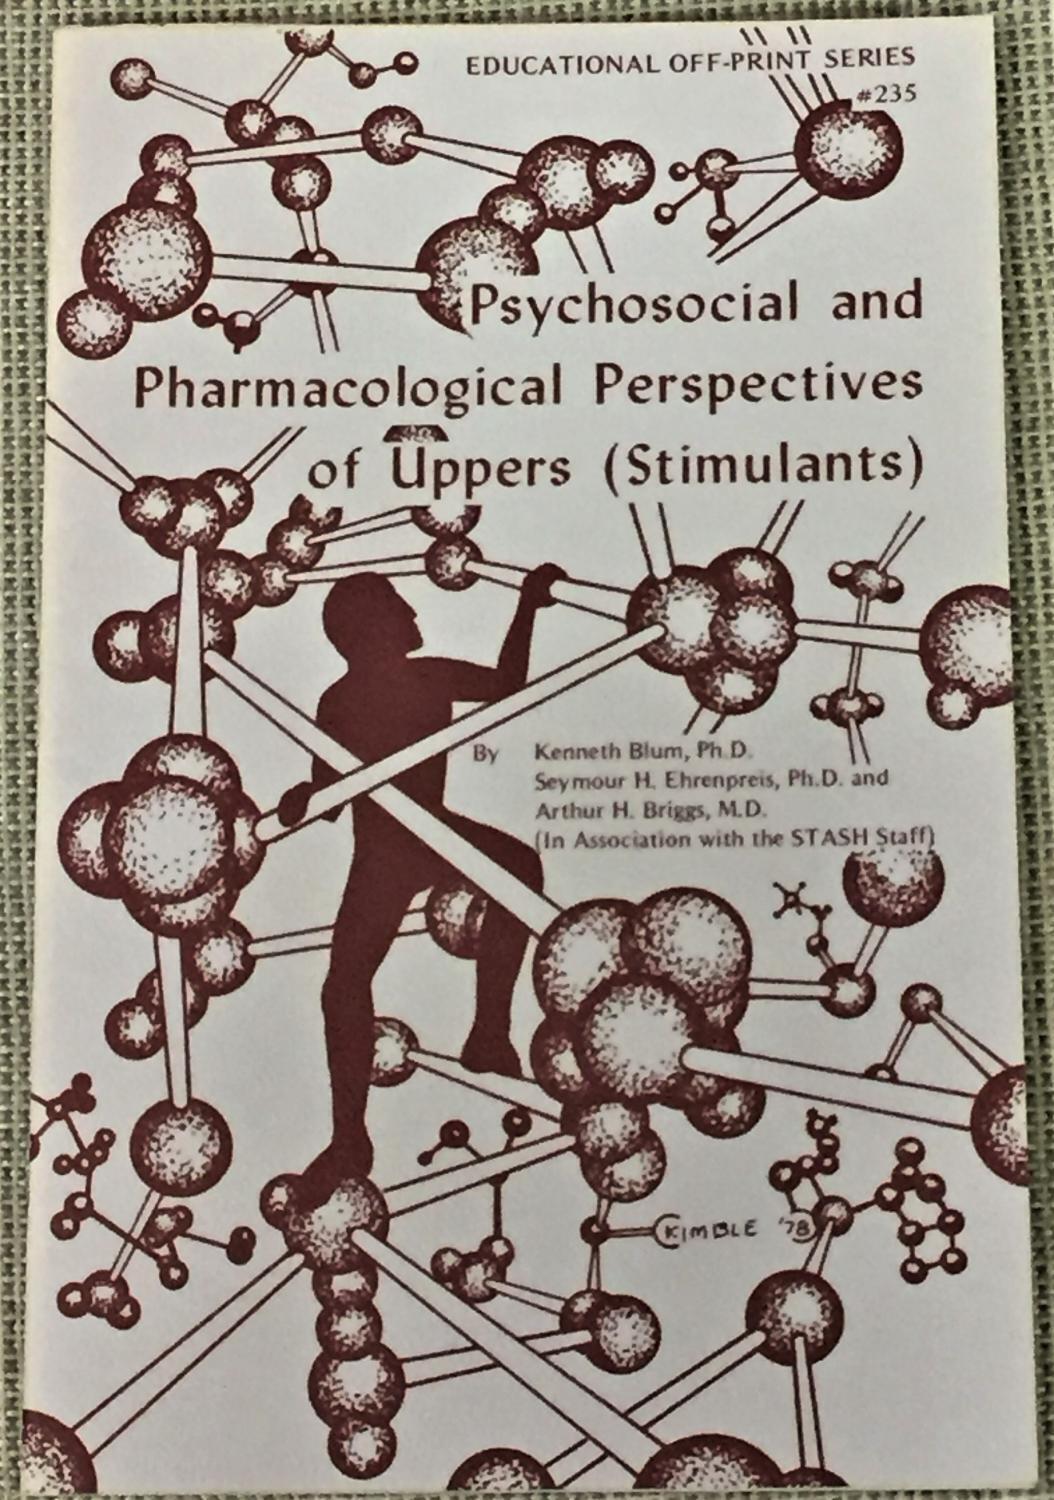 Ph D Kenneth Blum / PSYCHOSOCIAL AND PHARMACOLOGICAL PERSPECTIVES OF UPPERS 1st